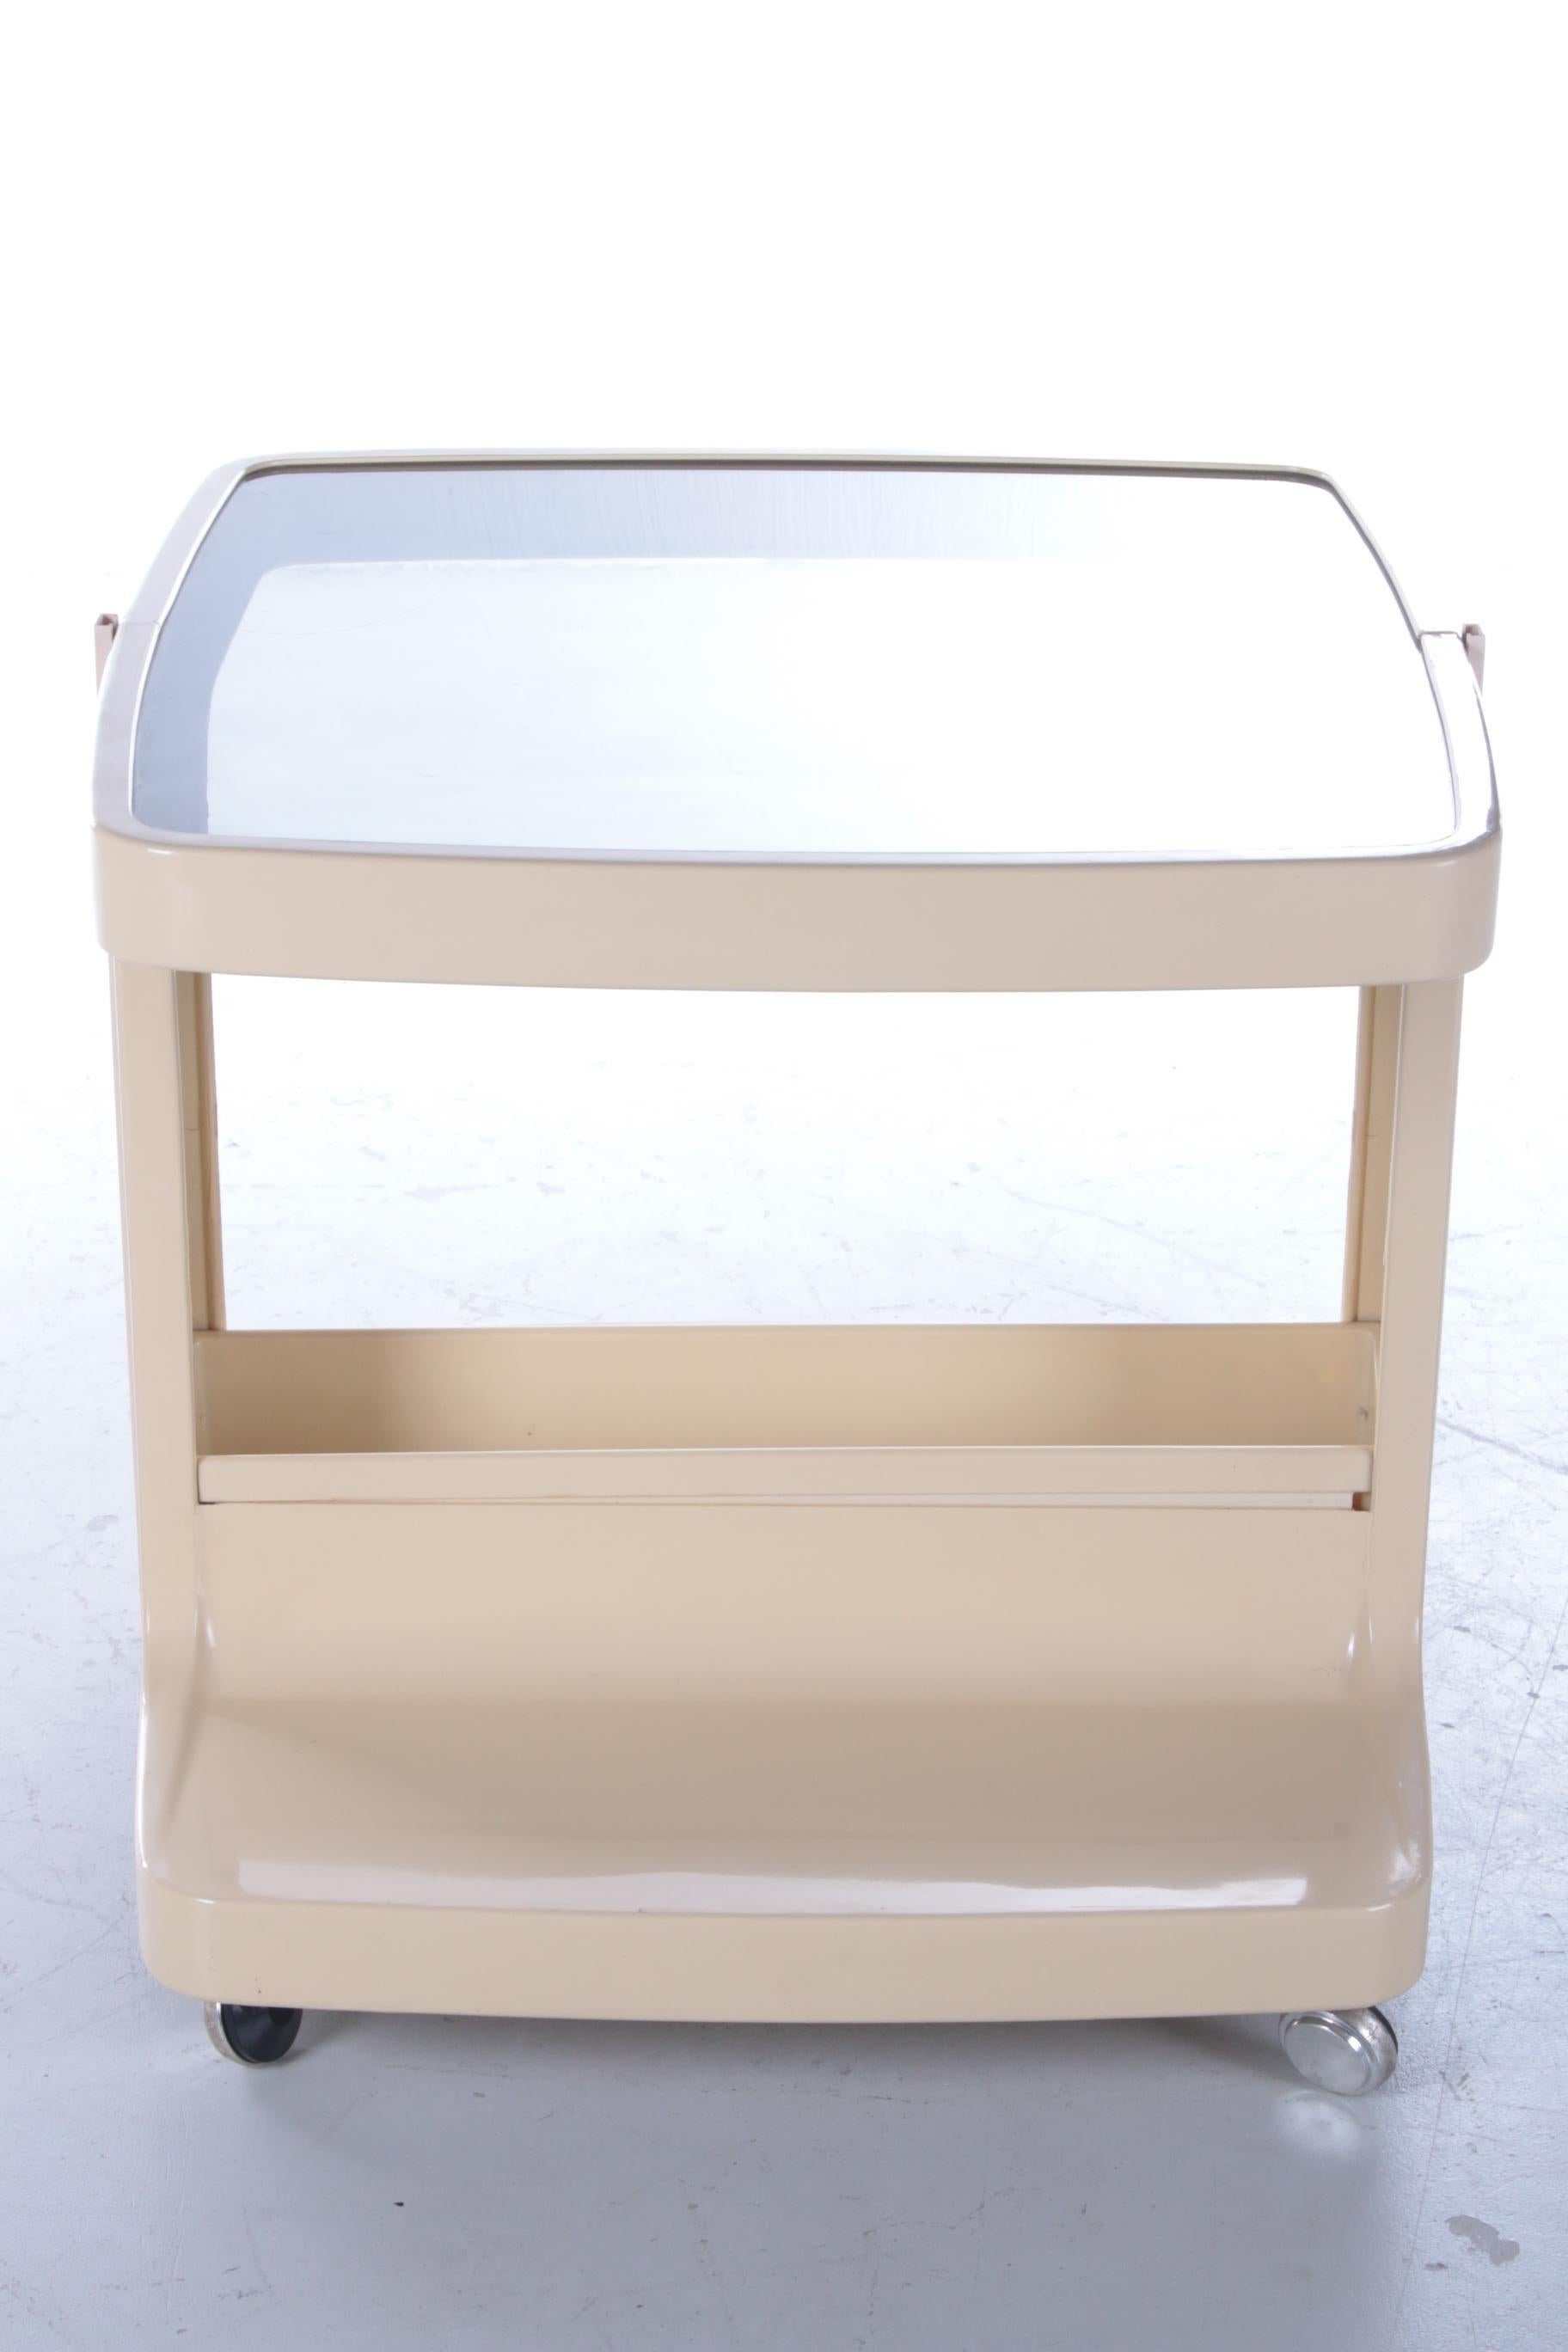 Smoked Glass Spage Age Trolley Side Table Vintage, 1960s, France